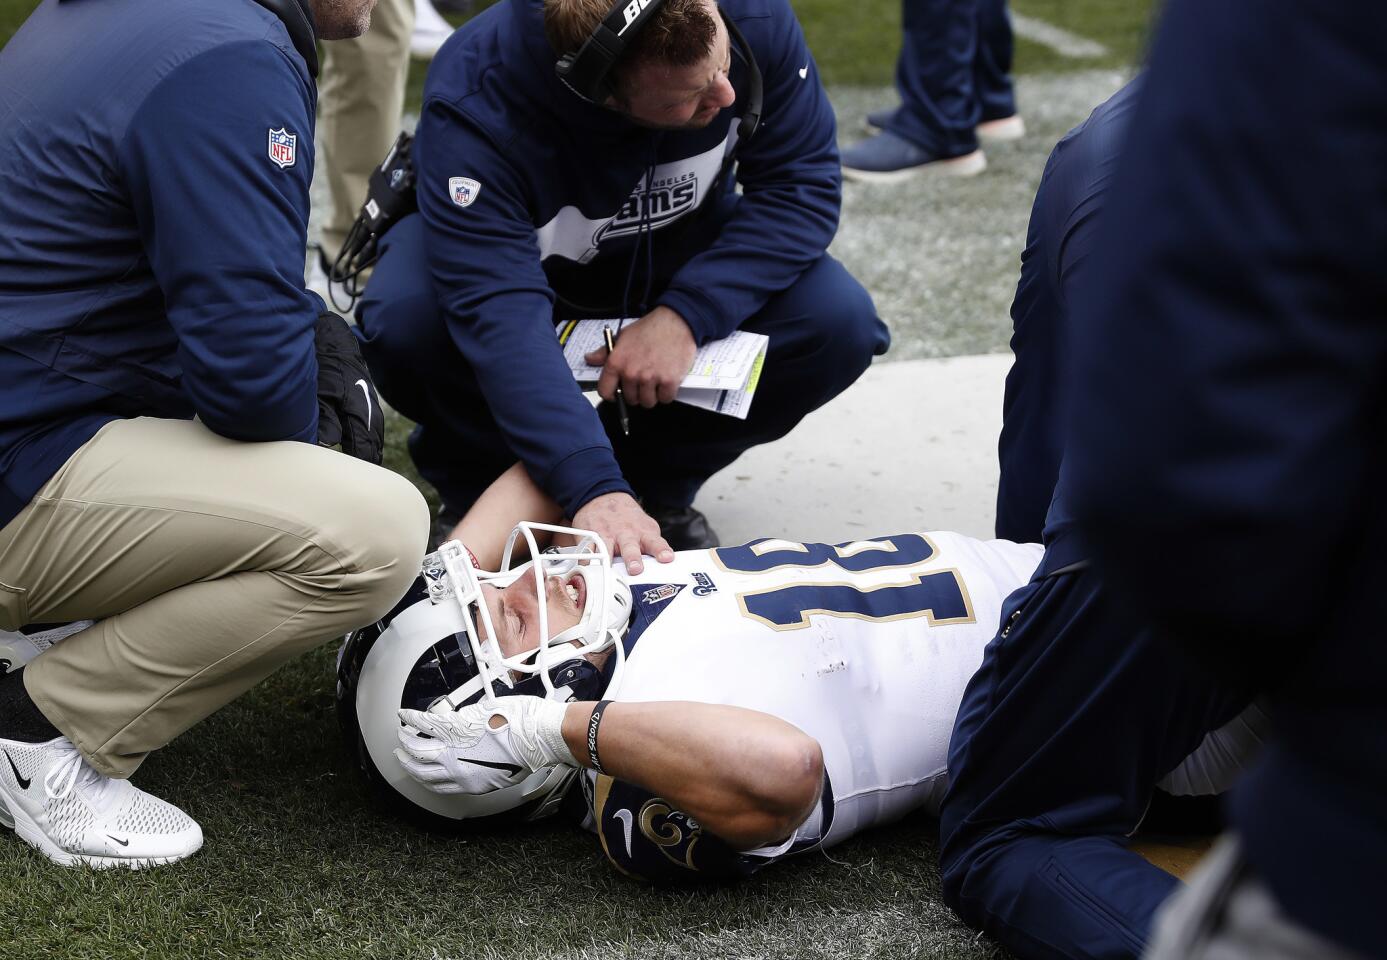 Los Angeles Rams wide receiver Cooper Kupp (18) is attended to on the sideline after an injury against the Denver Broncos during the first half of an NFL football game, Sunday, Oct. 14, 2018, in Denver.